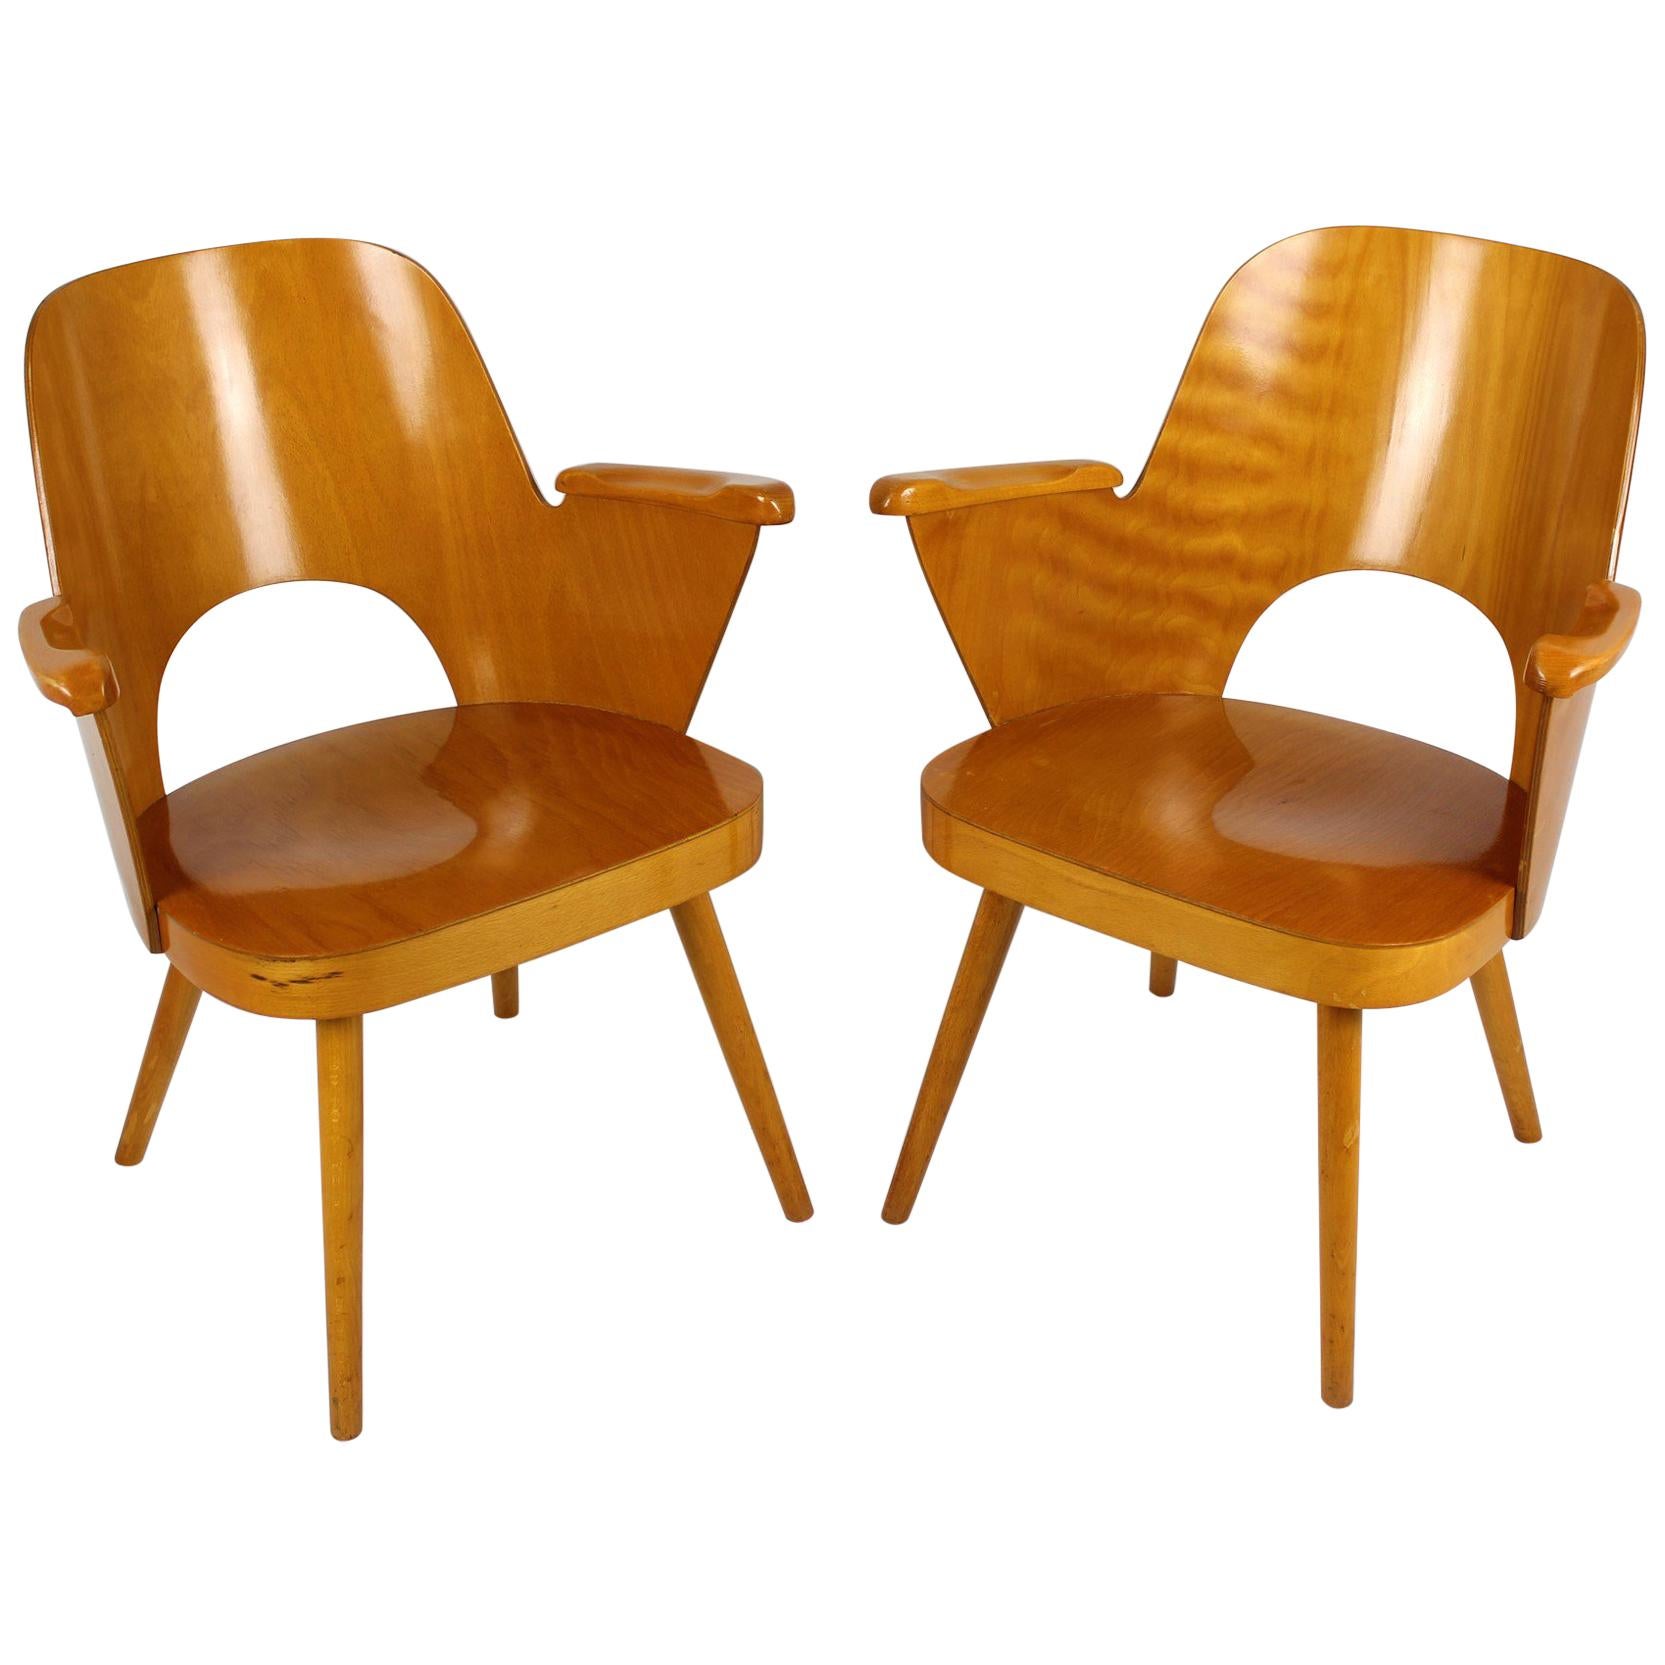 Wooden Armchairs by Lubomír Hofmann for Ton, 1961, Set of 2